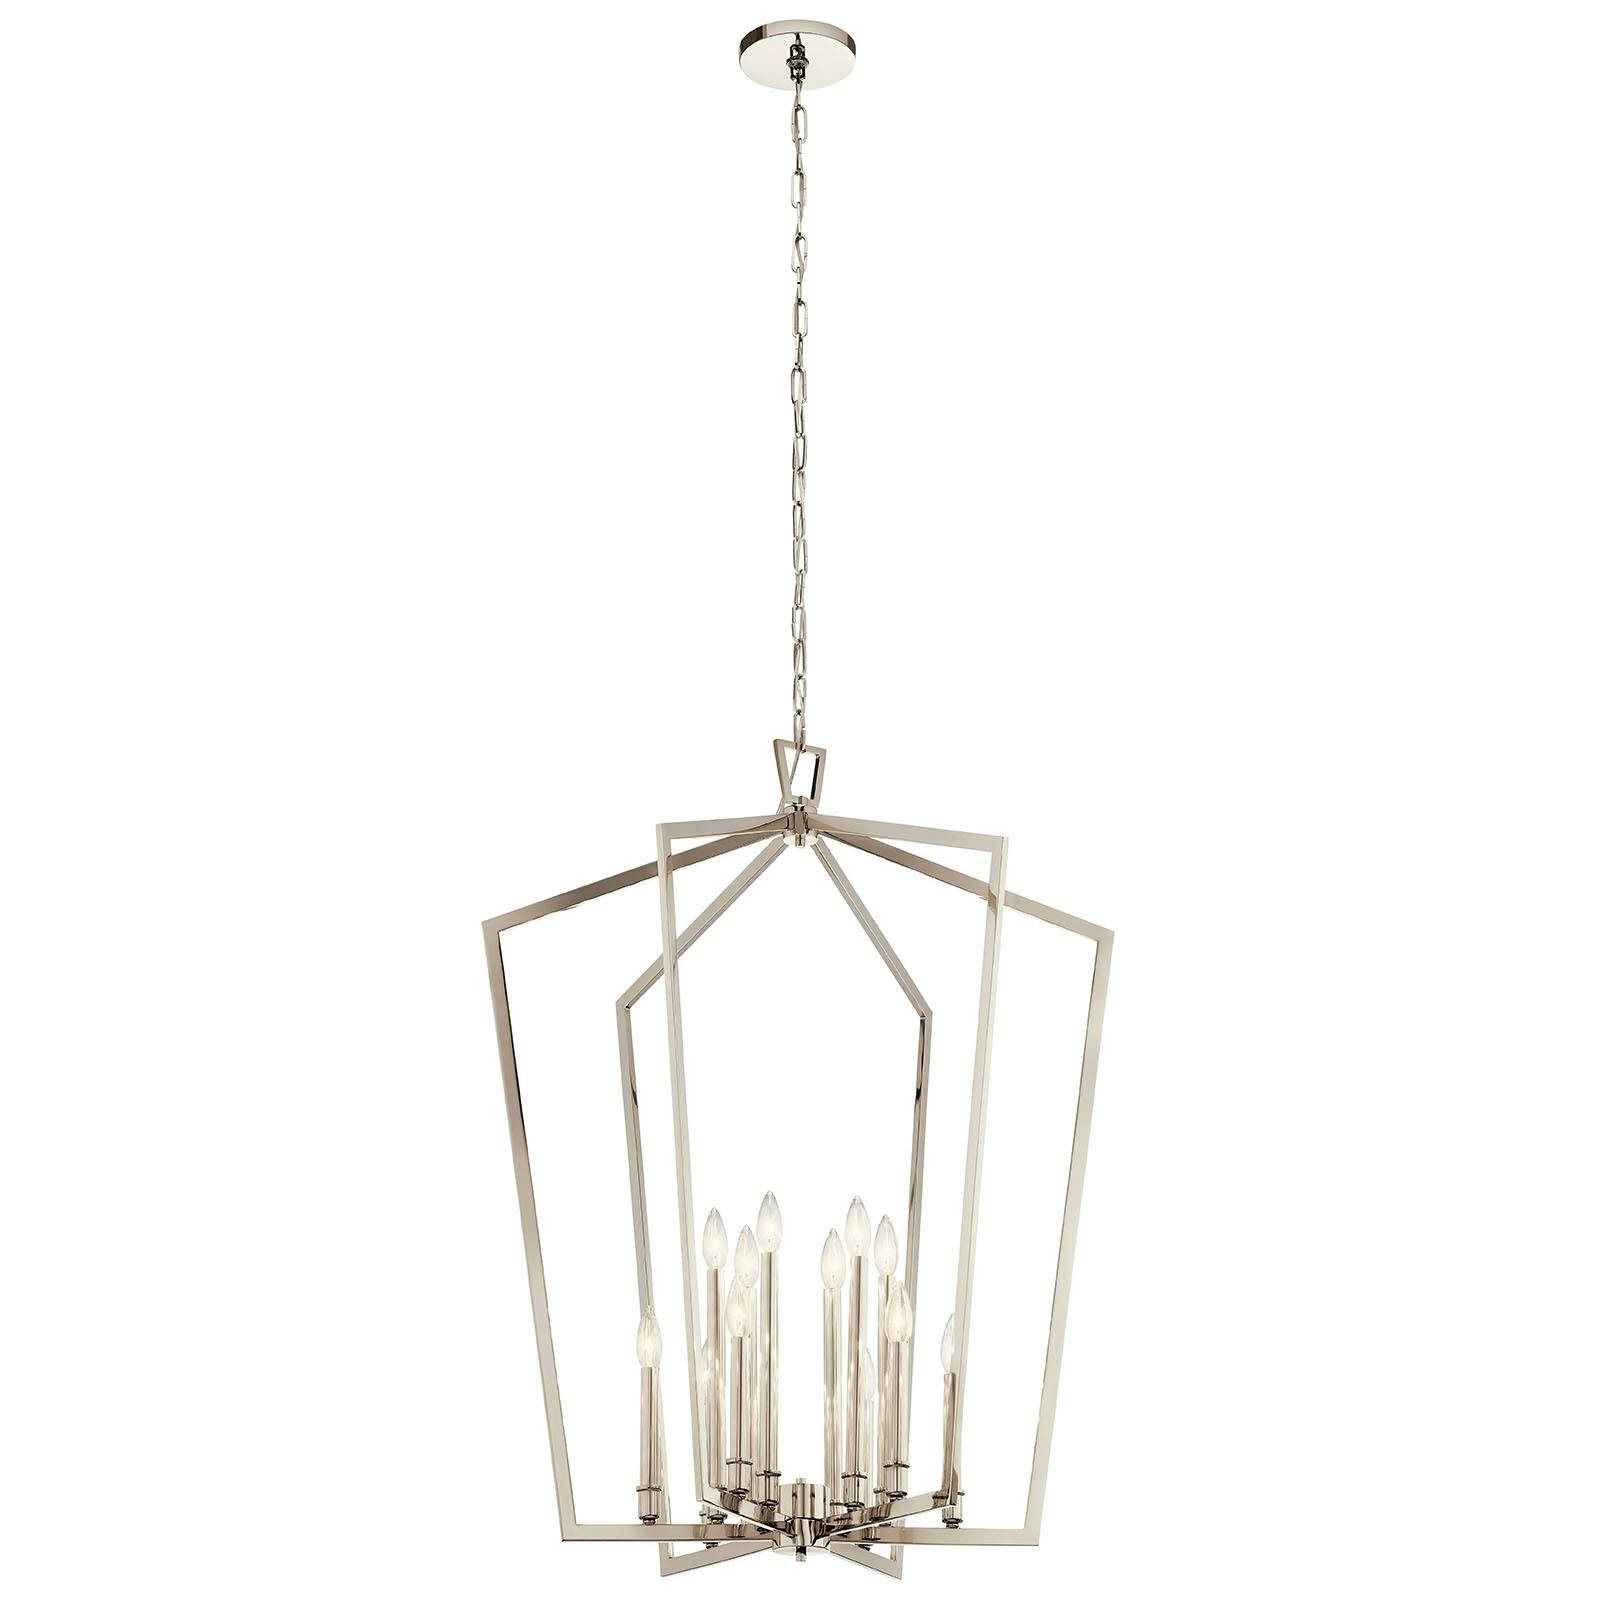 Abbotswell 12 Light Chandelier Nickel on a white background